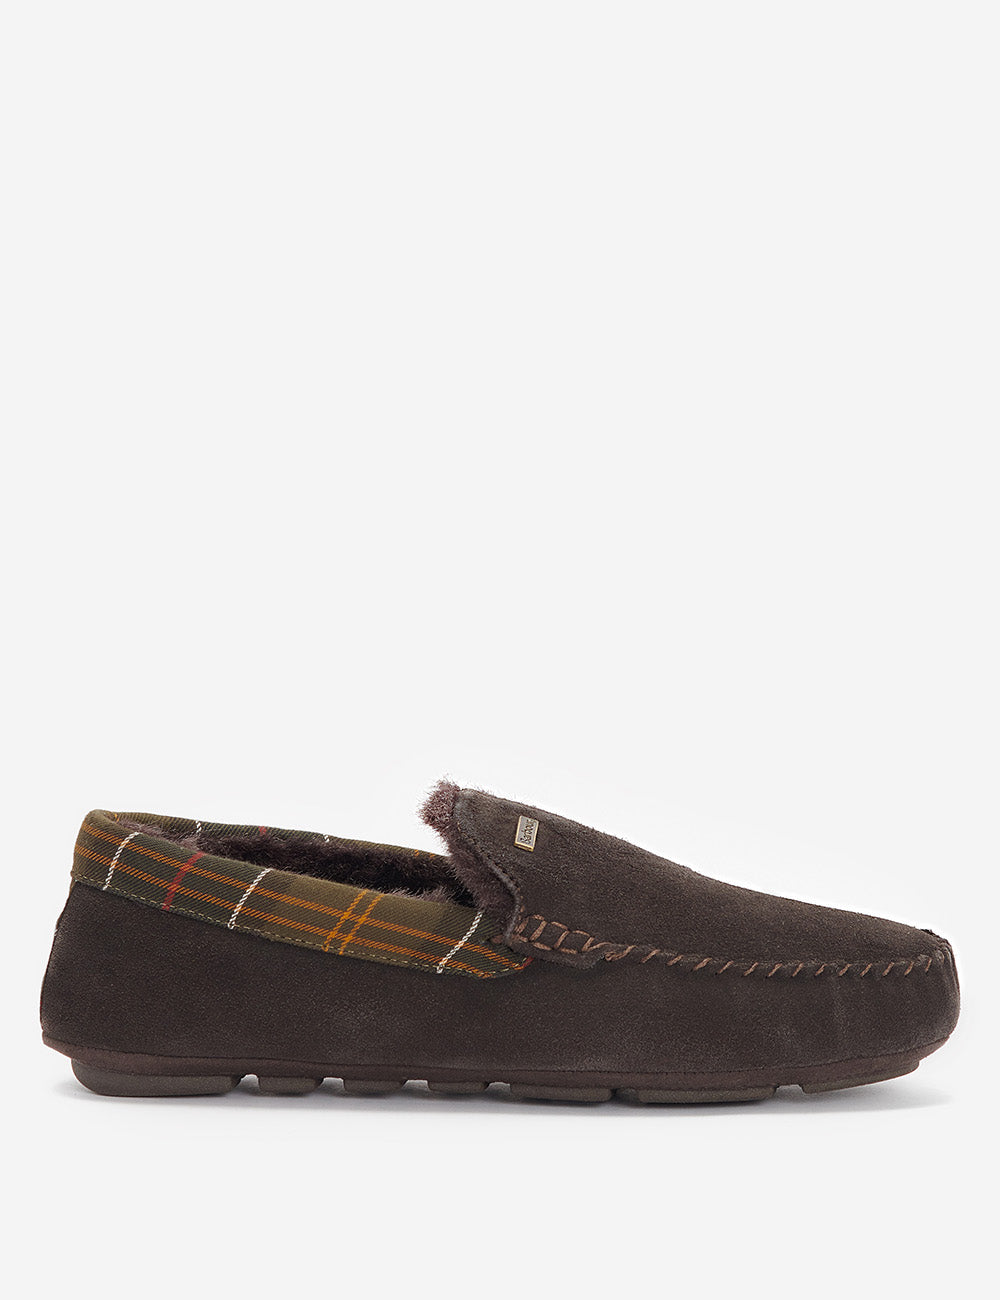 Barbour Monty Slippers - Brown Suede